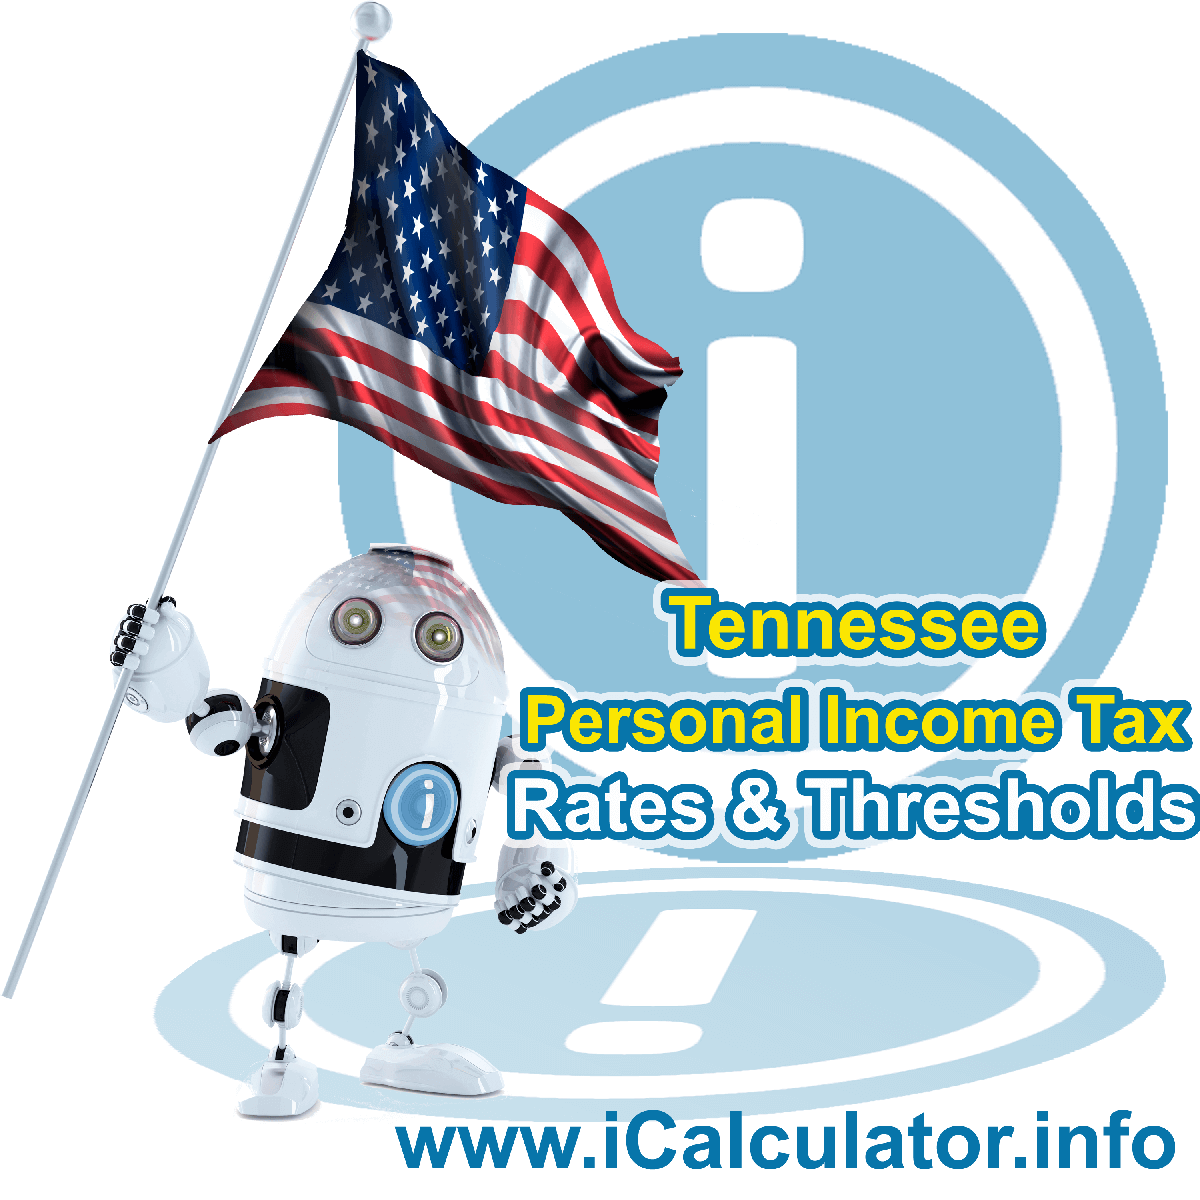 Tennessee State Tax Tables 2014. This image displays details of the Tennessee State Tax Tables for the 2014 tax return year which is provided in support of the 2014 US Tax Calculator